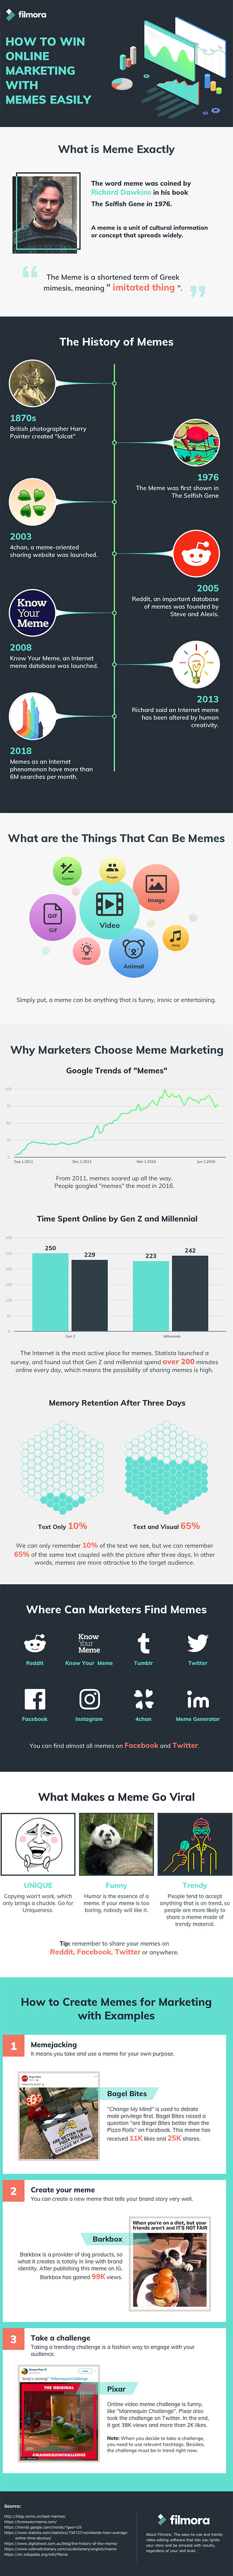 Infographic: How to Win Online Marketing with Memes Easily